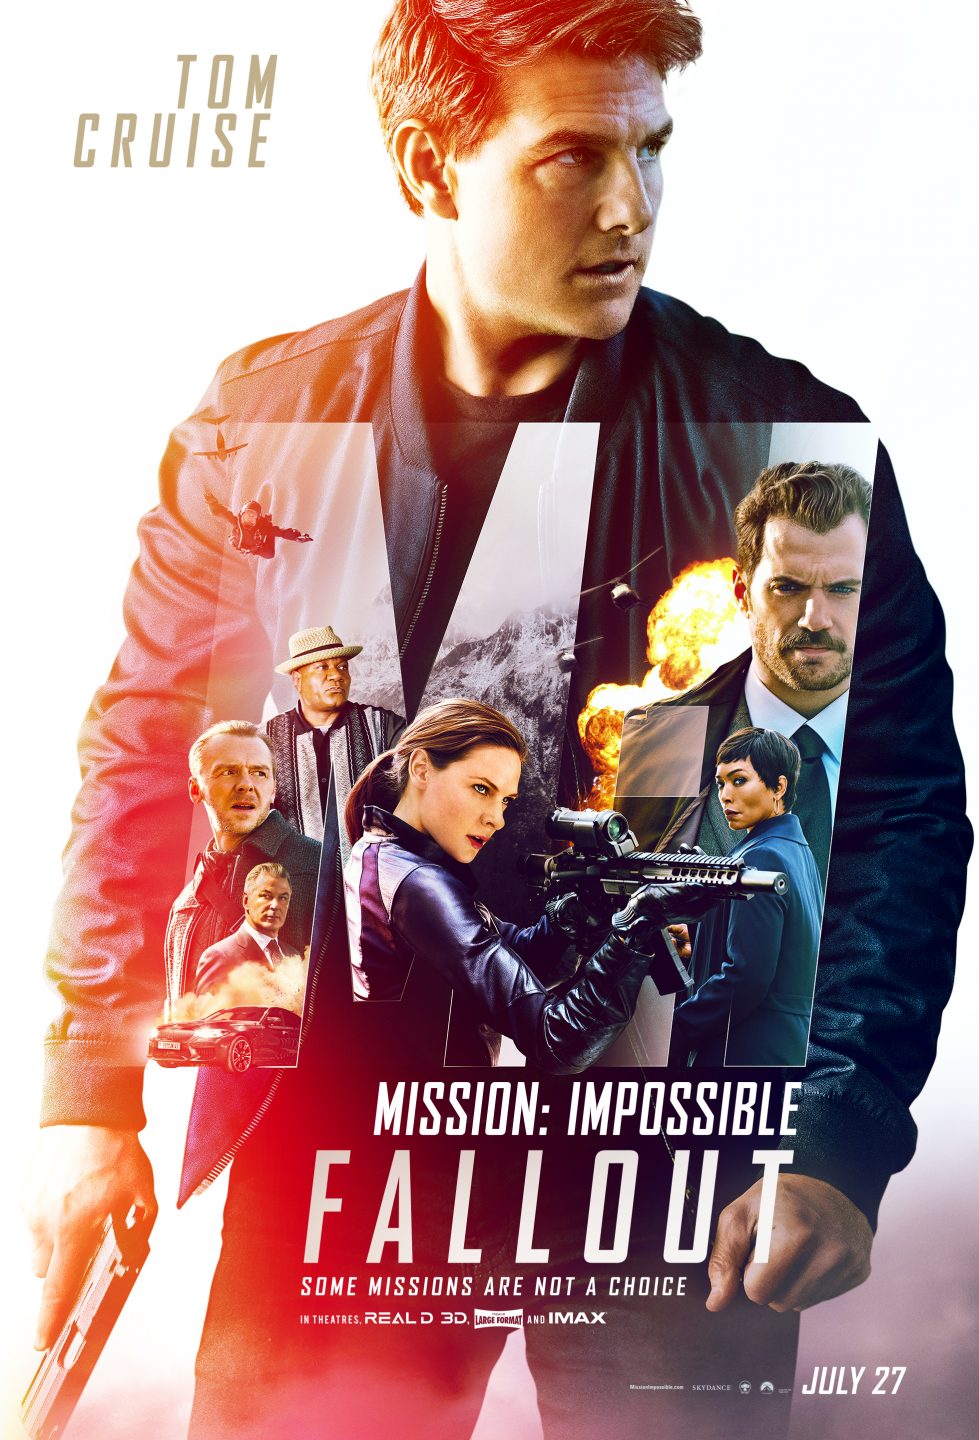 Mission: Impossible - Fallout poster (Paramount Pictures/SKydance)